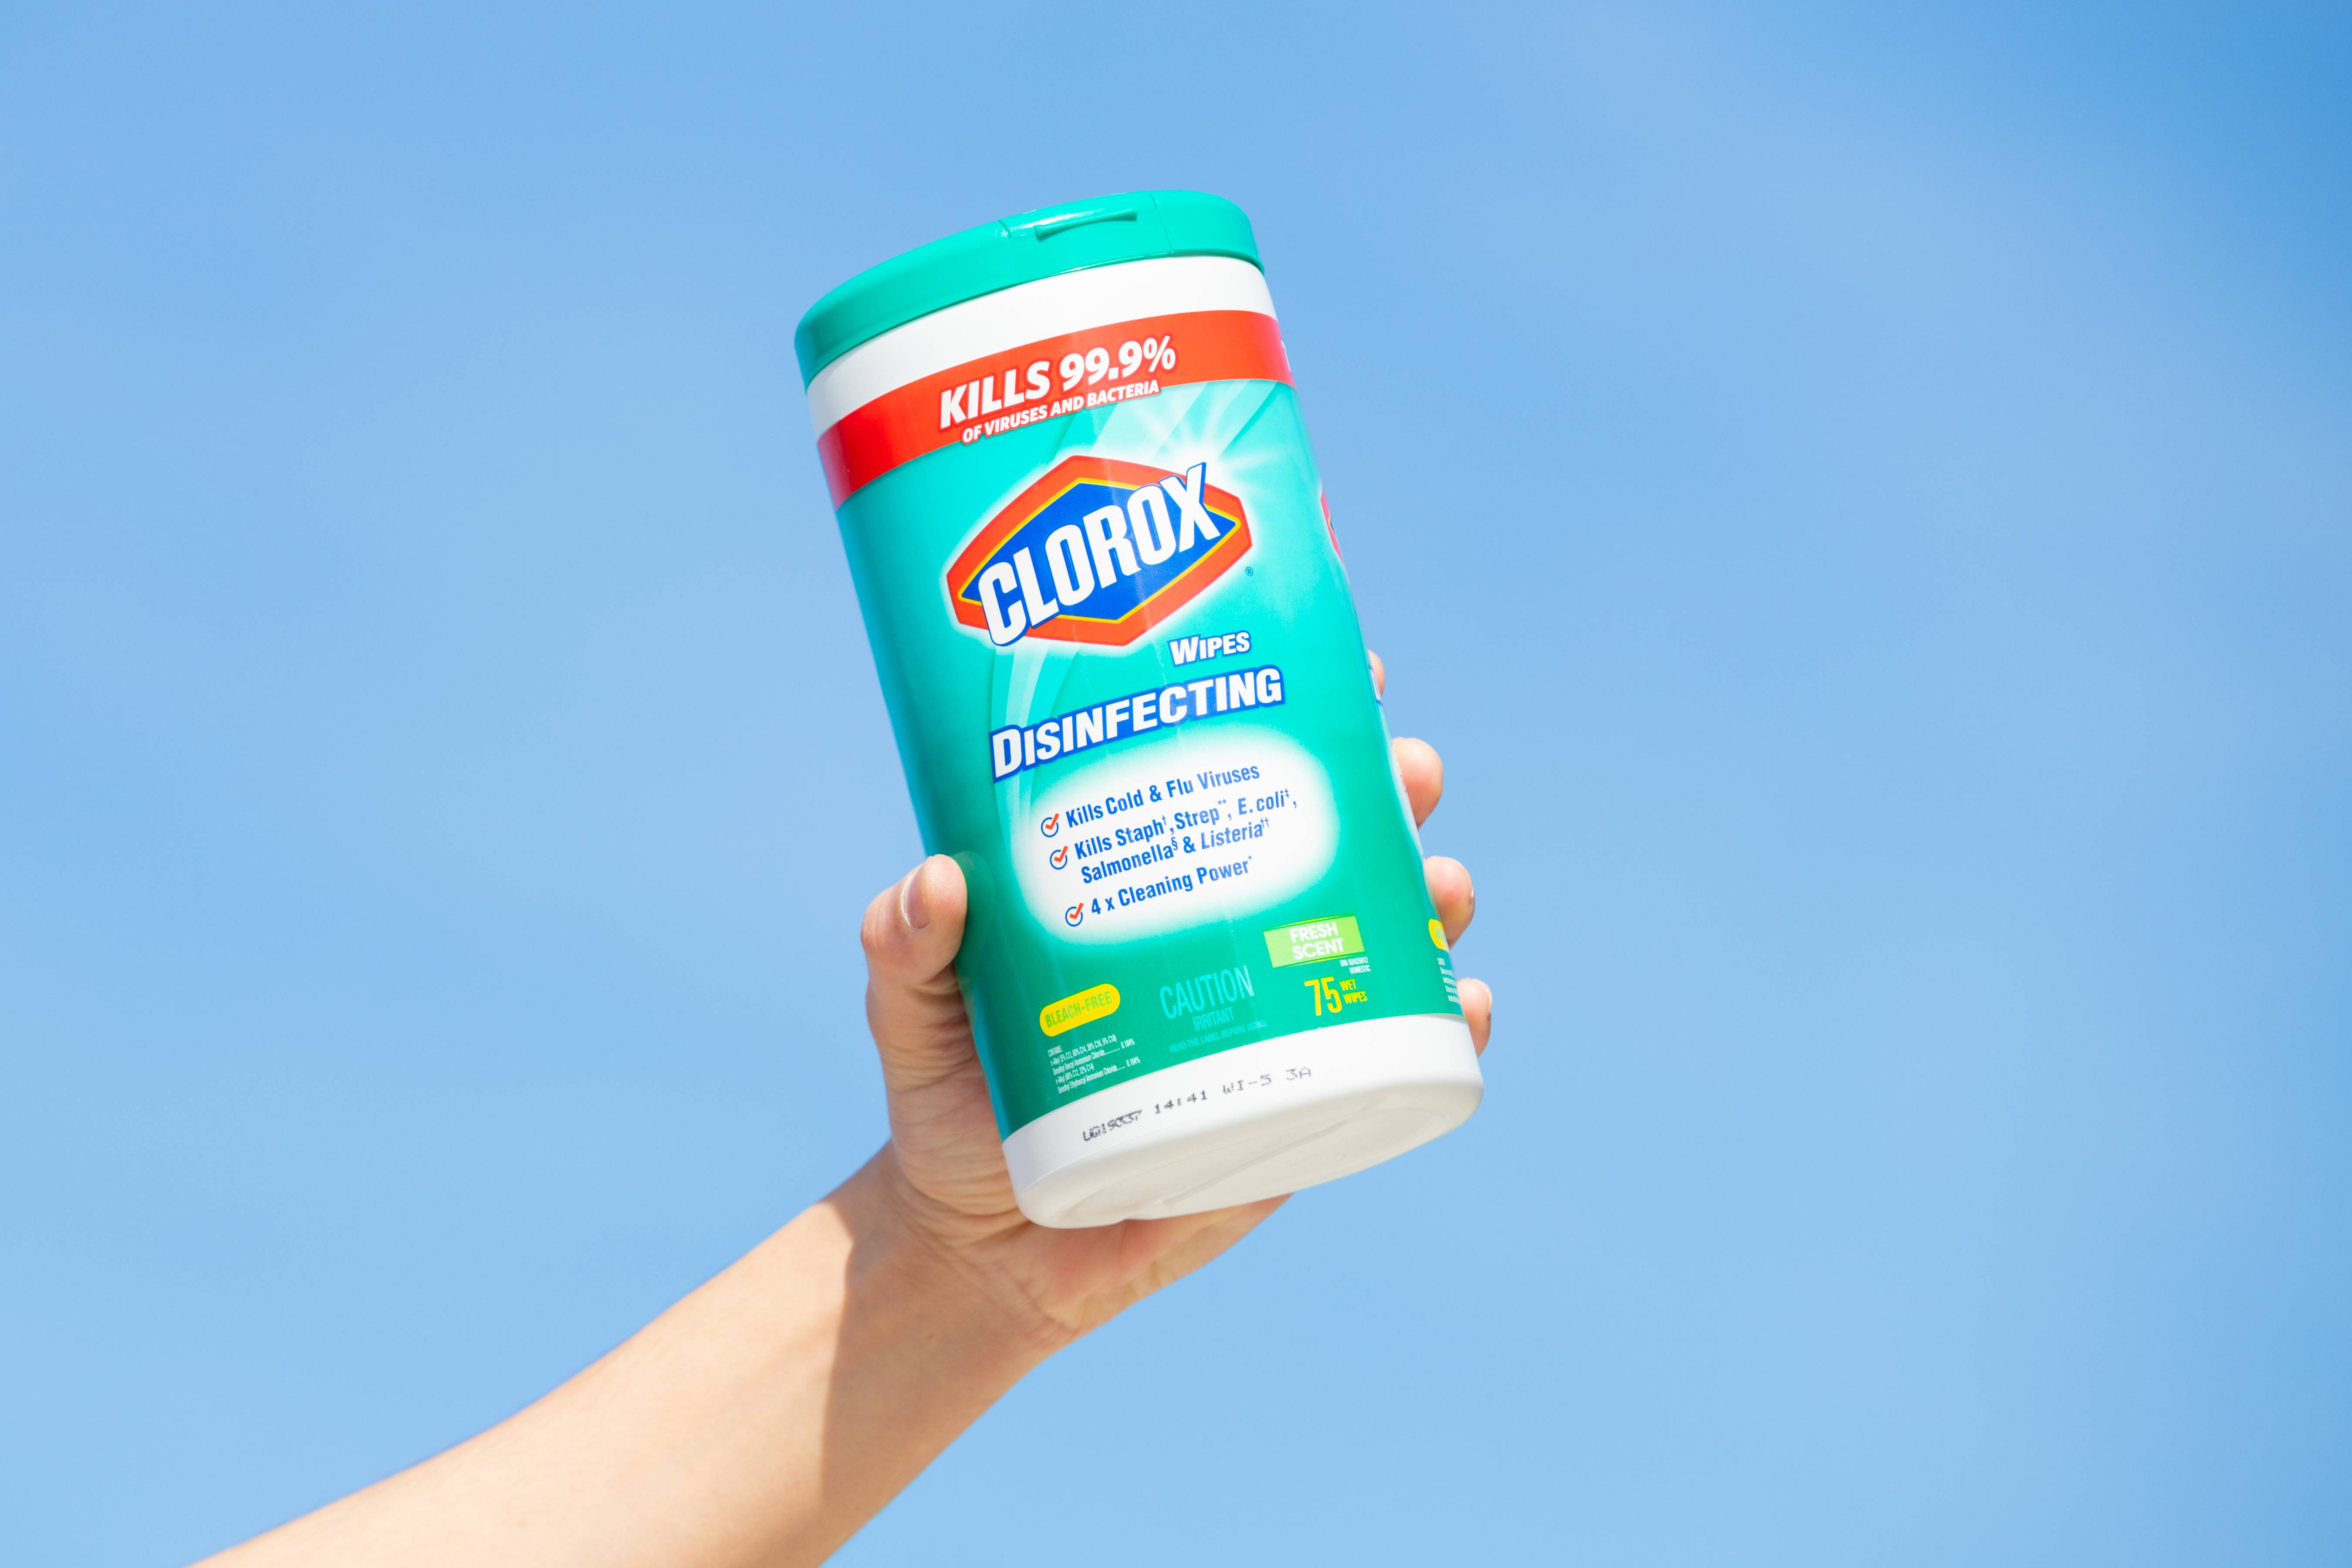 Clorox Wipes on Skin: 7 Things NOT to Use Clorox Wipes on